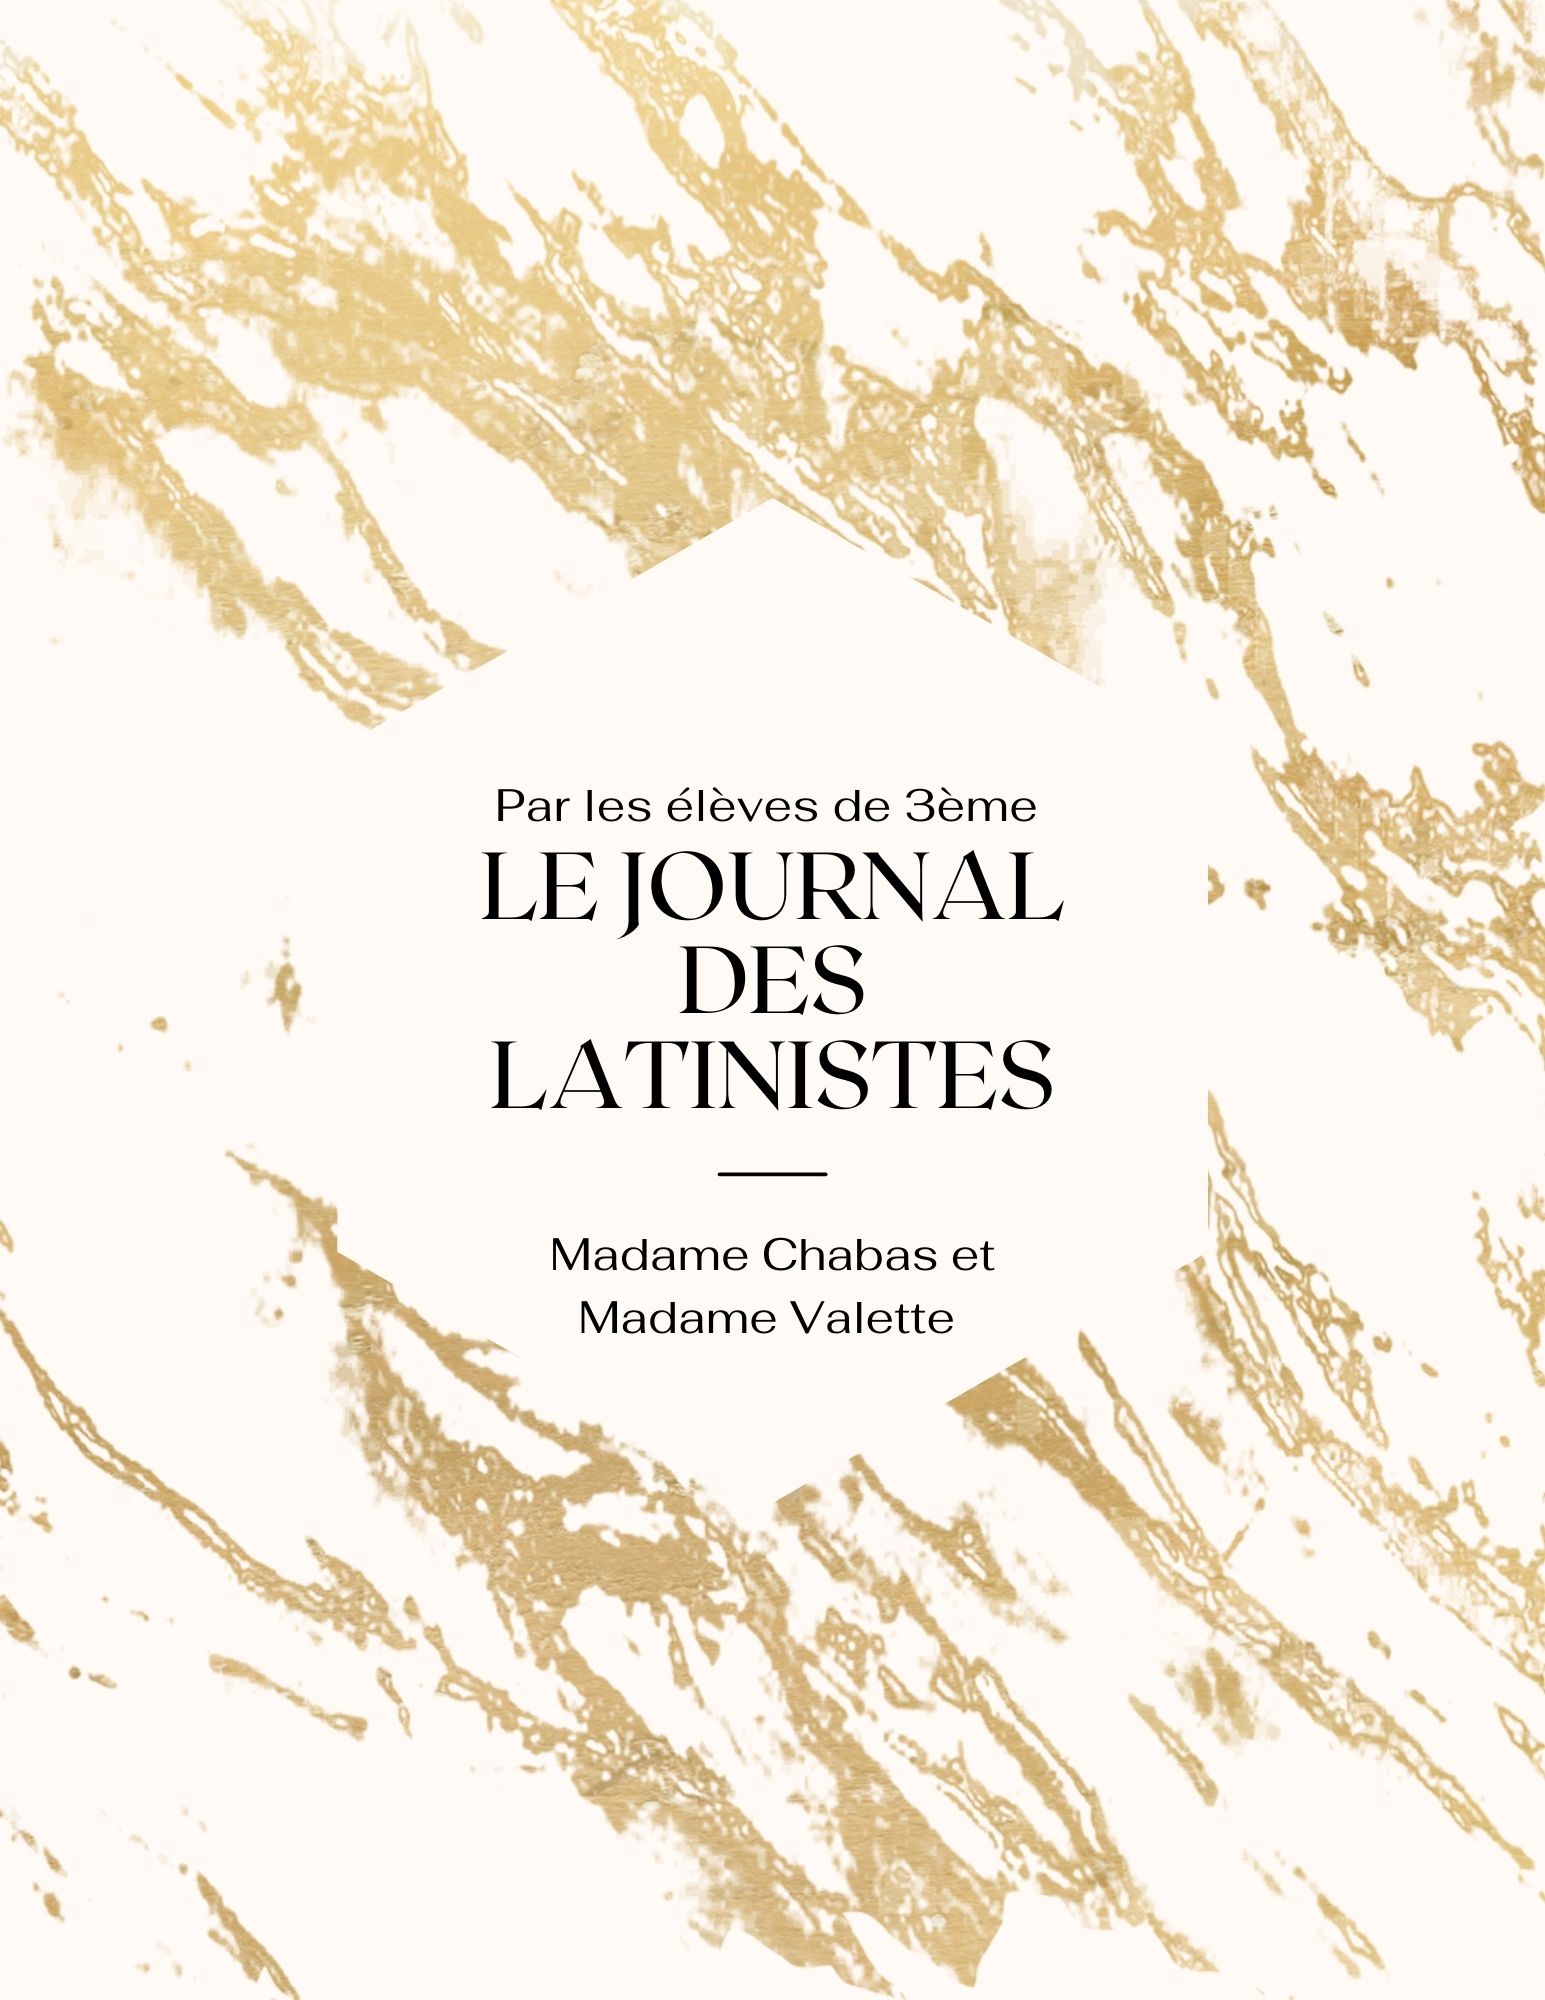 You are currently viewing Le Journal des latinistes